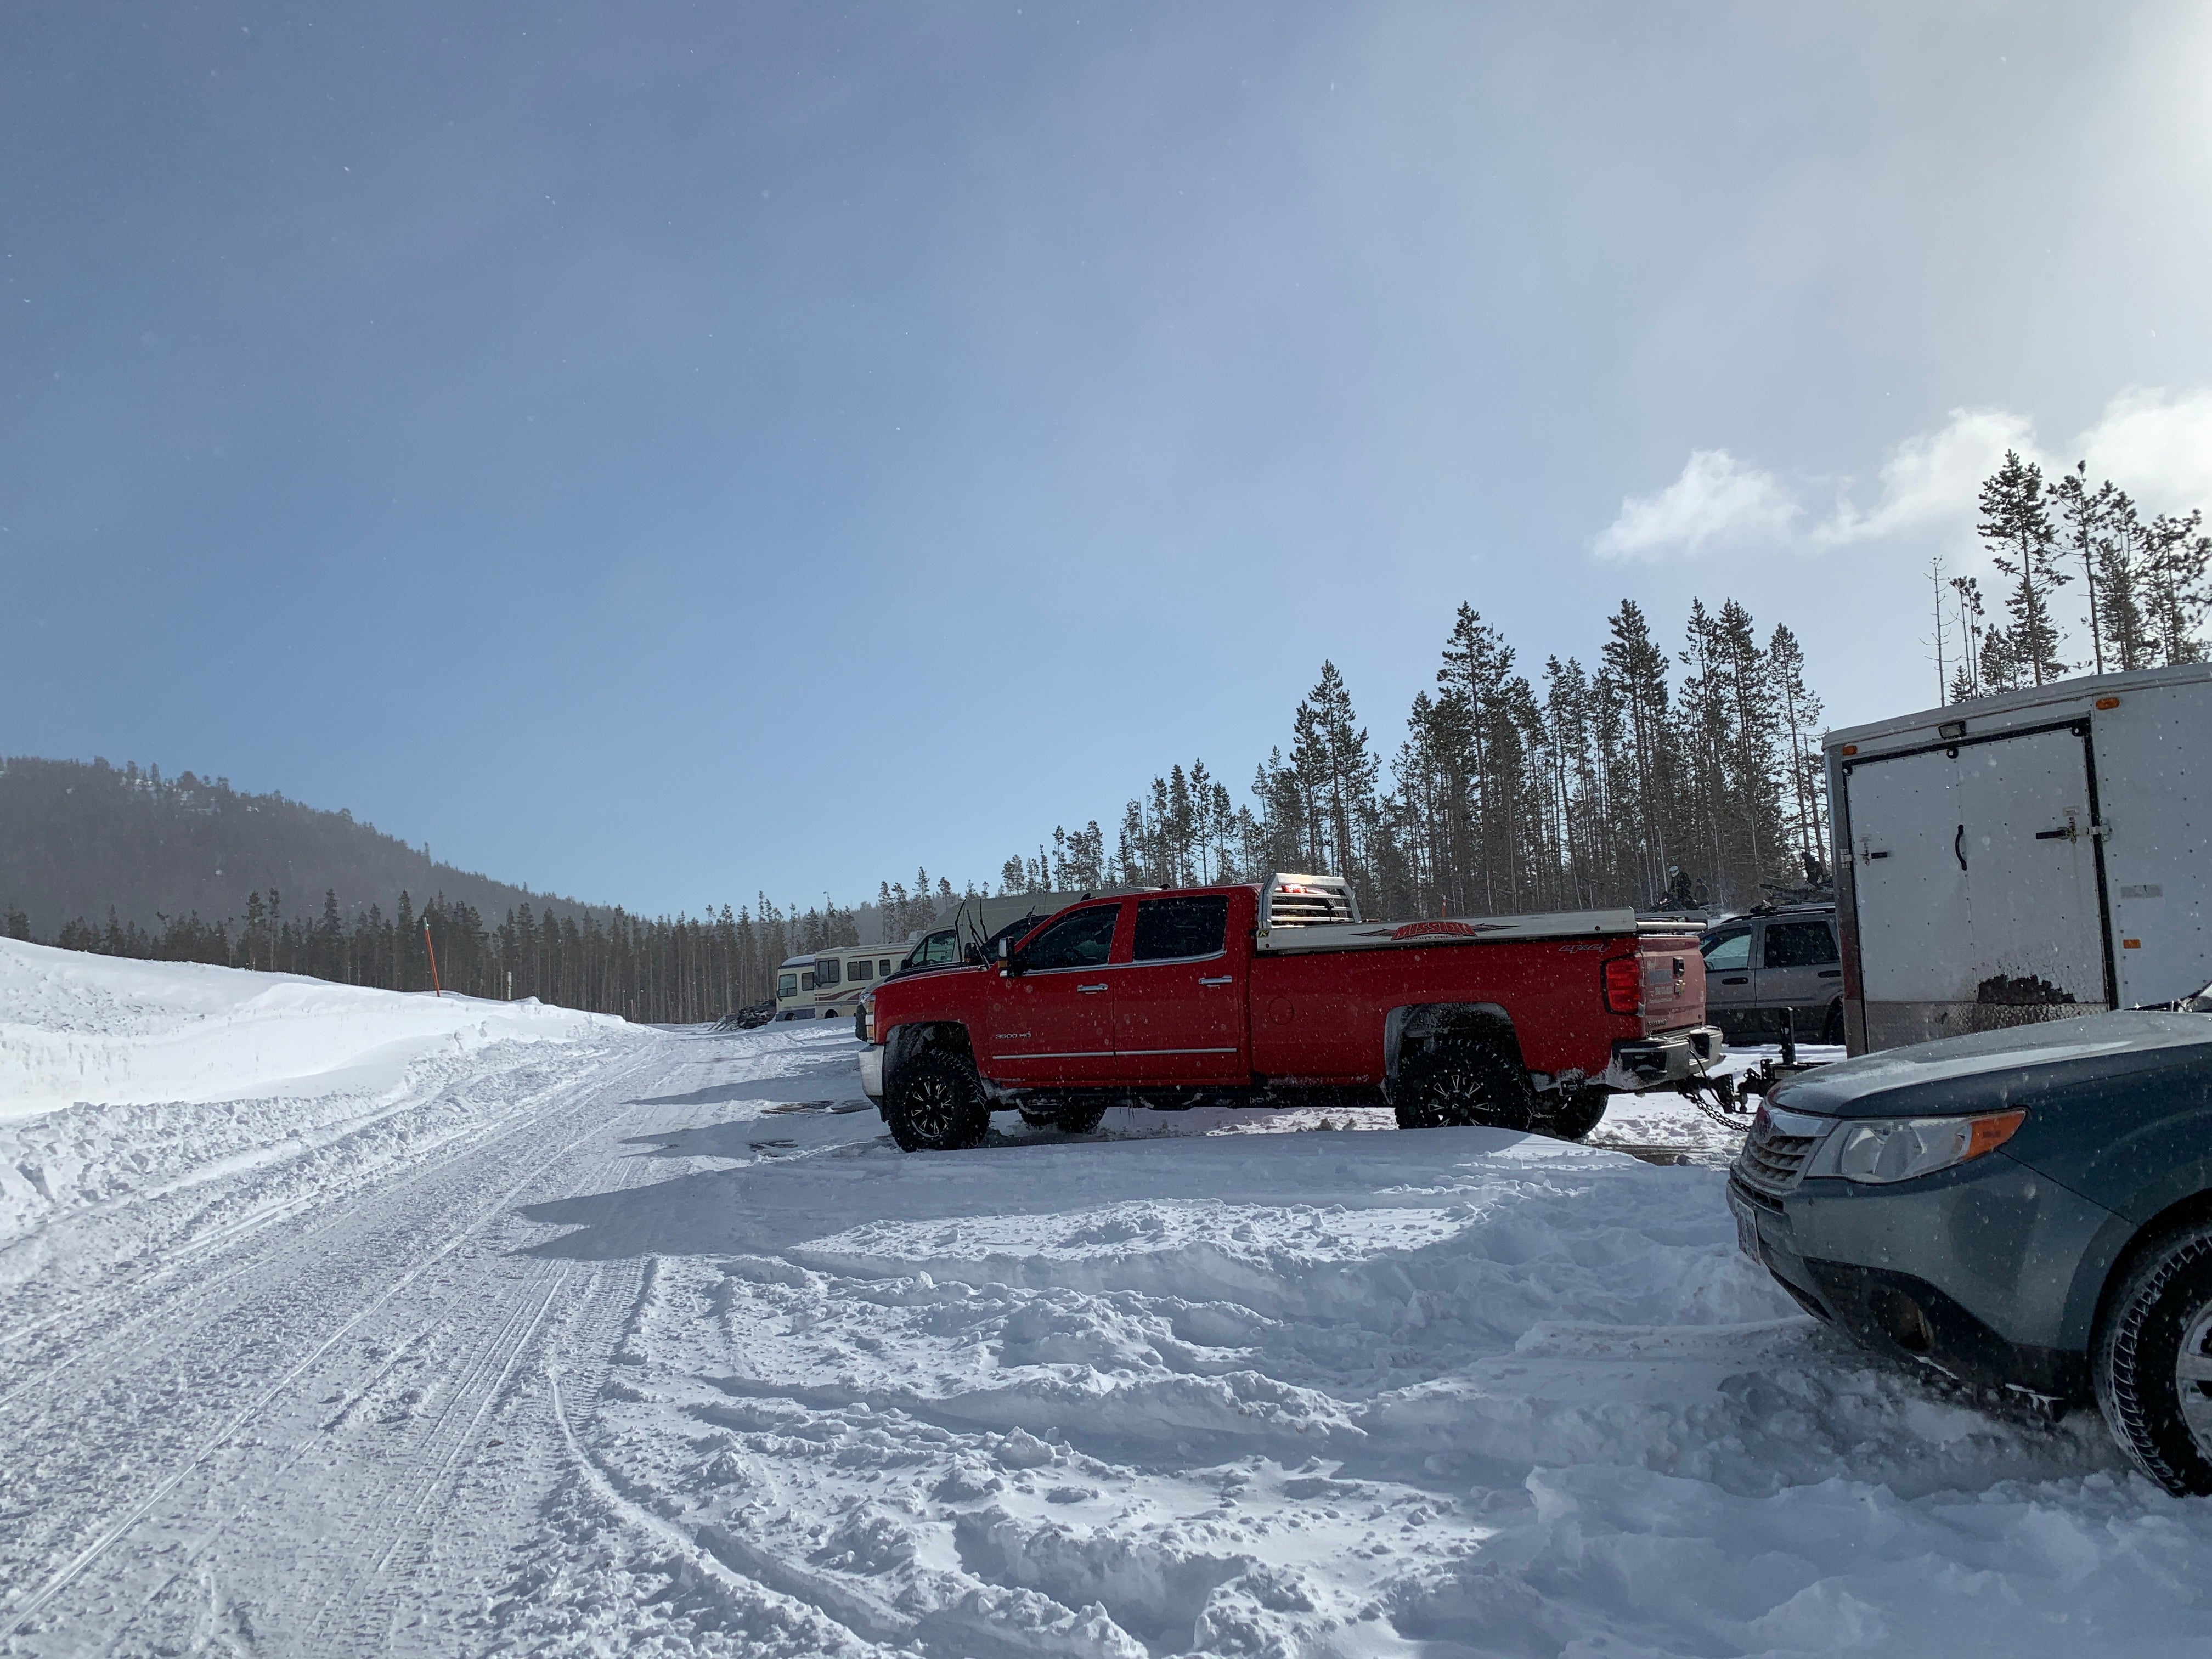 Camper submitted image from Kapka Butte Sno Park - 1